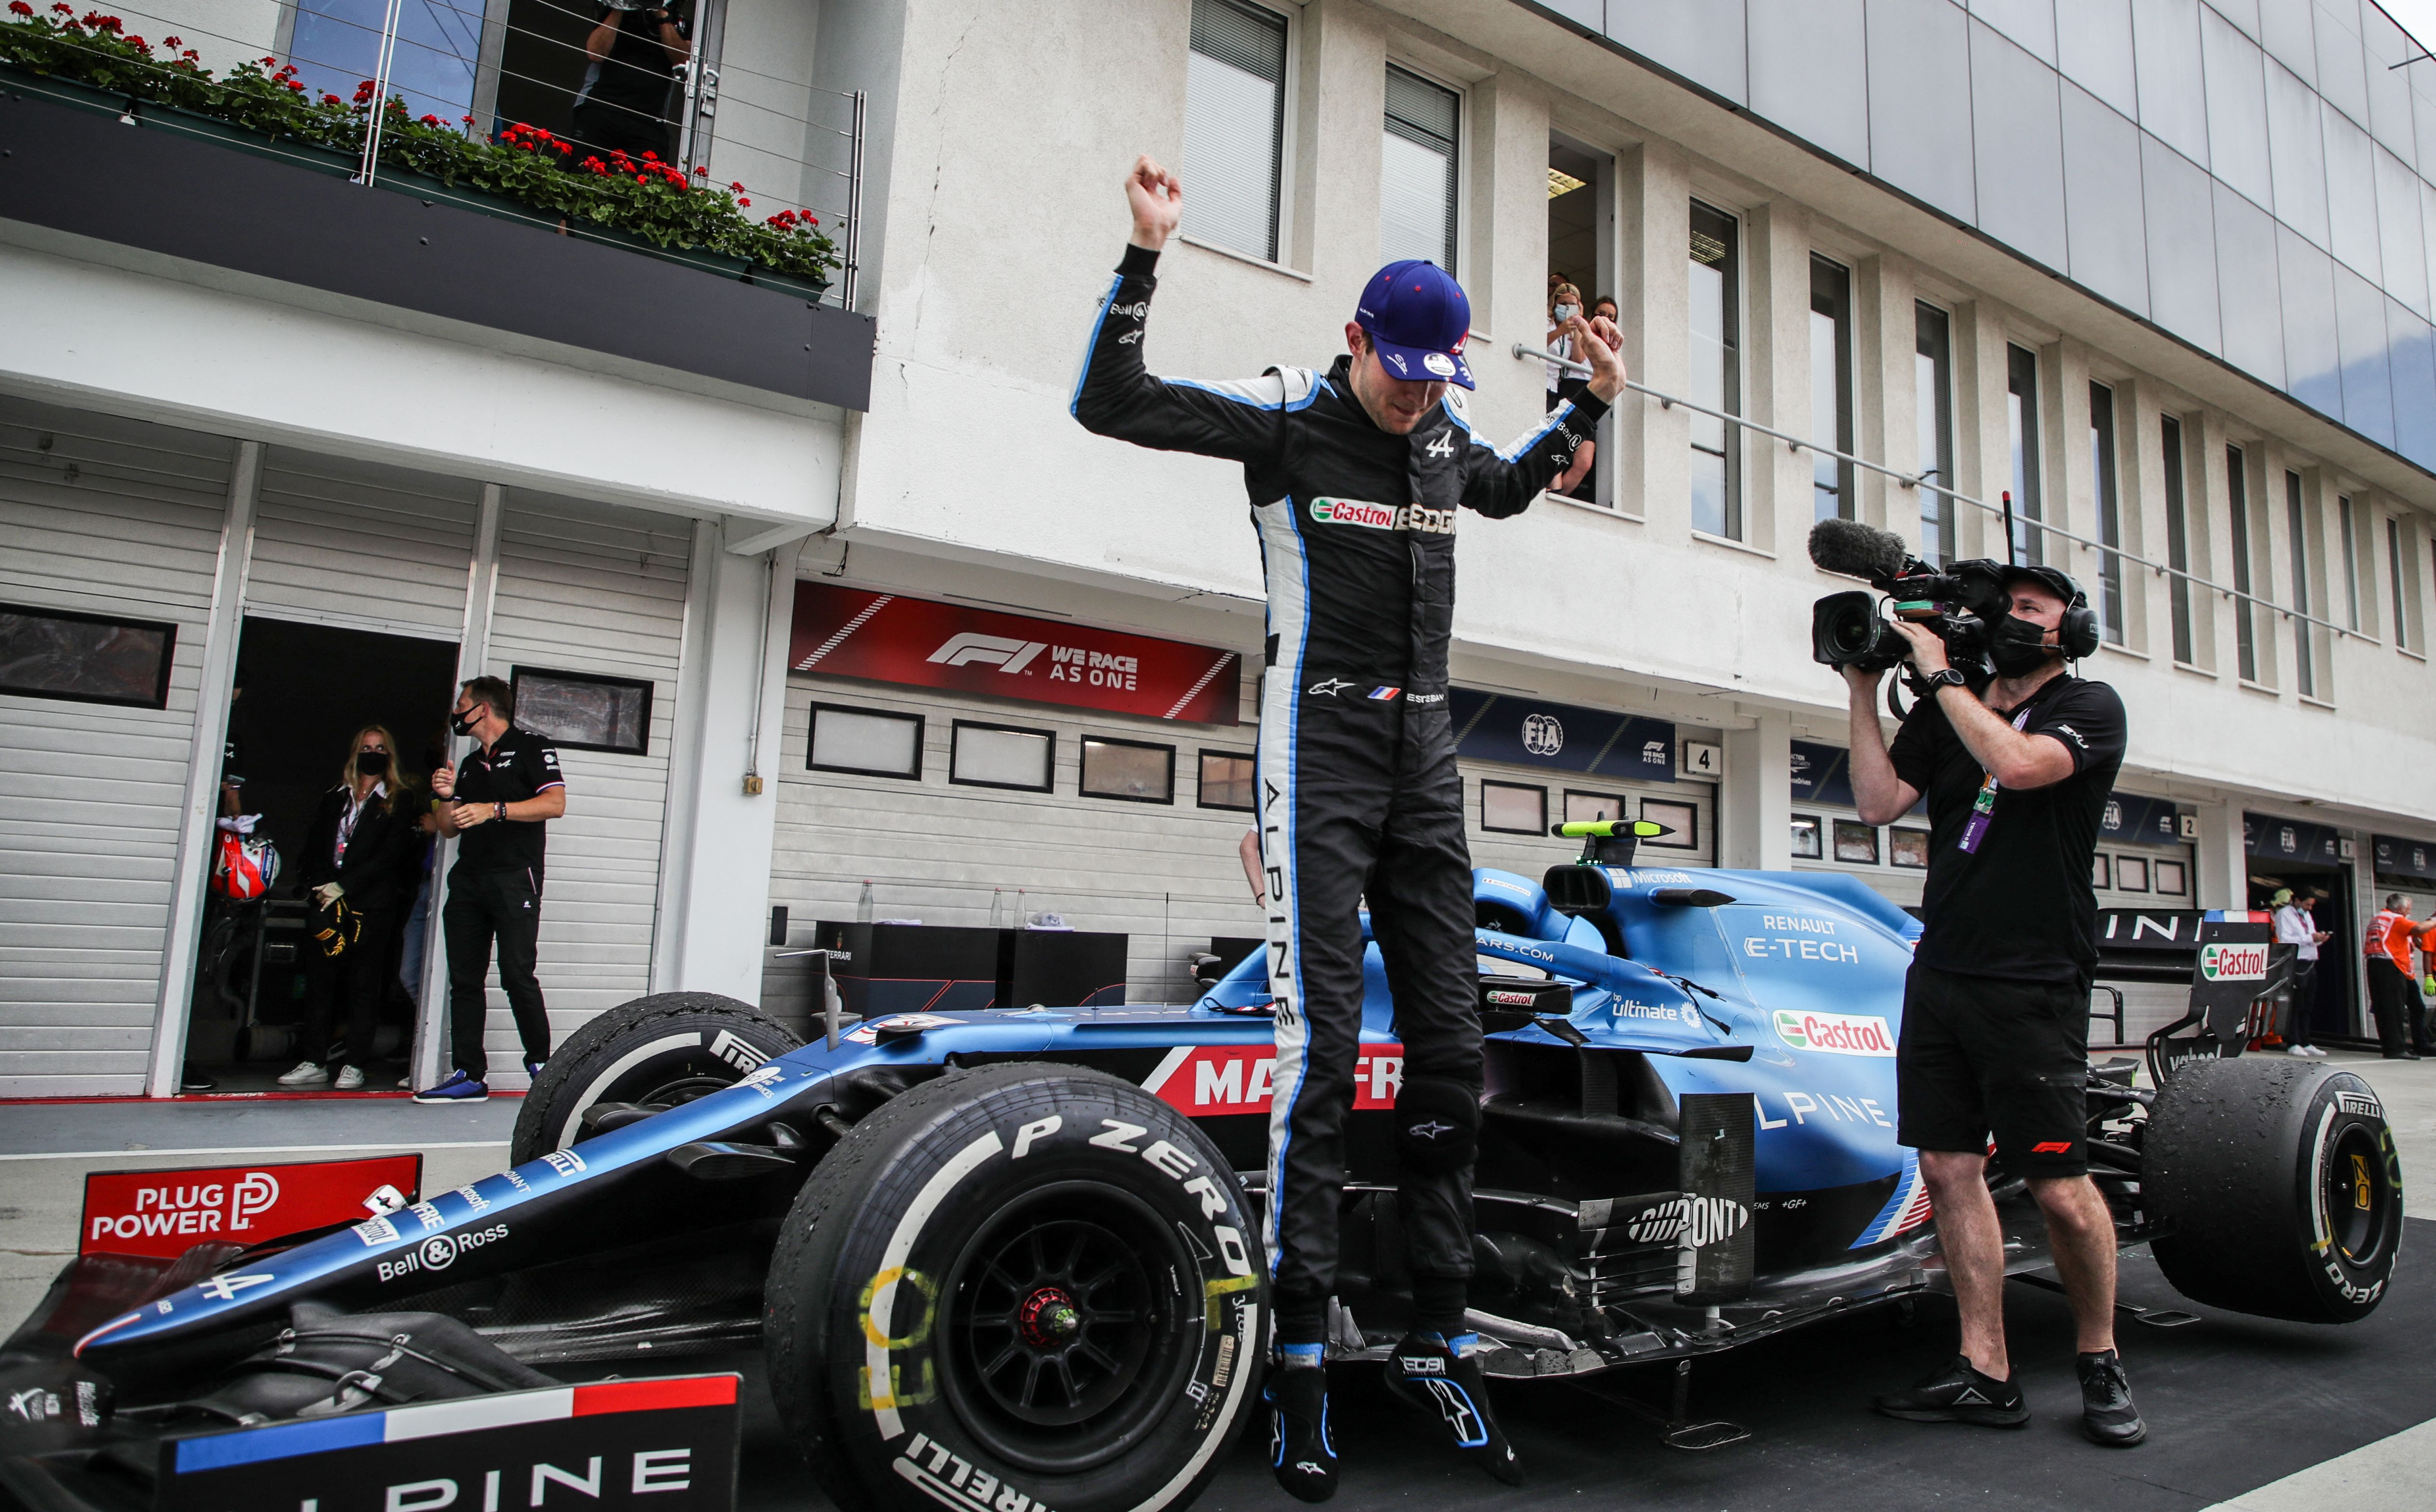 Full results GP Hungary  Ocon takes first F1 victory in crazy Grand Prix